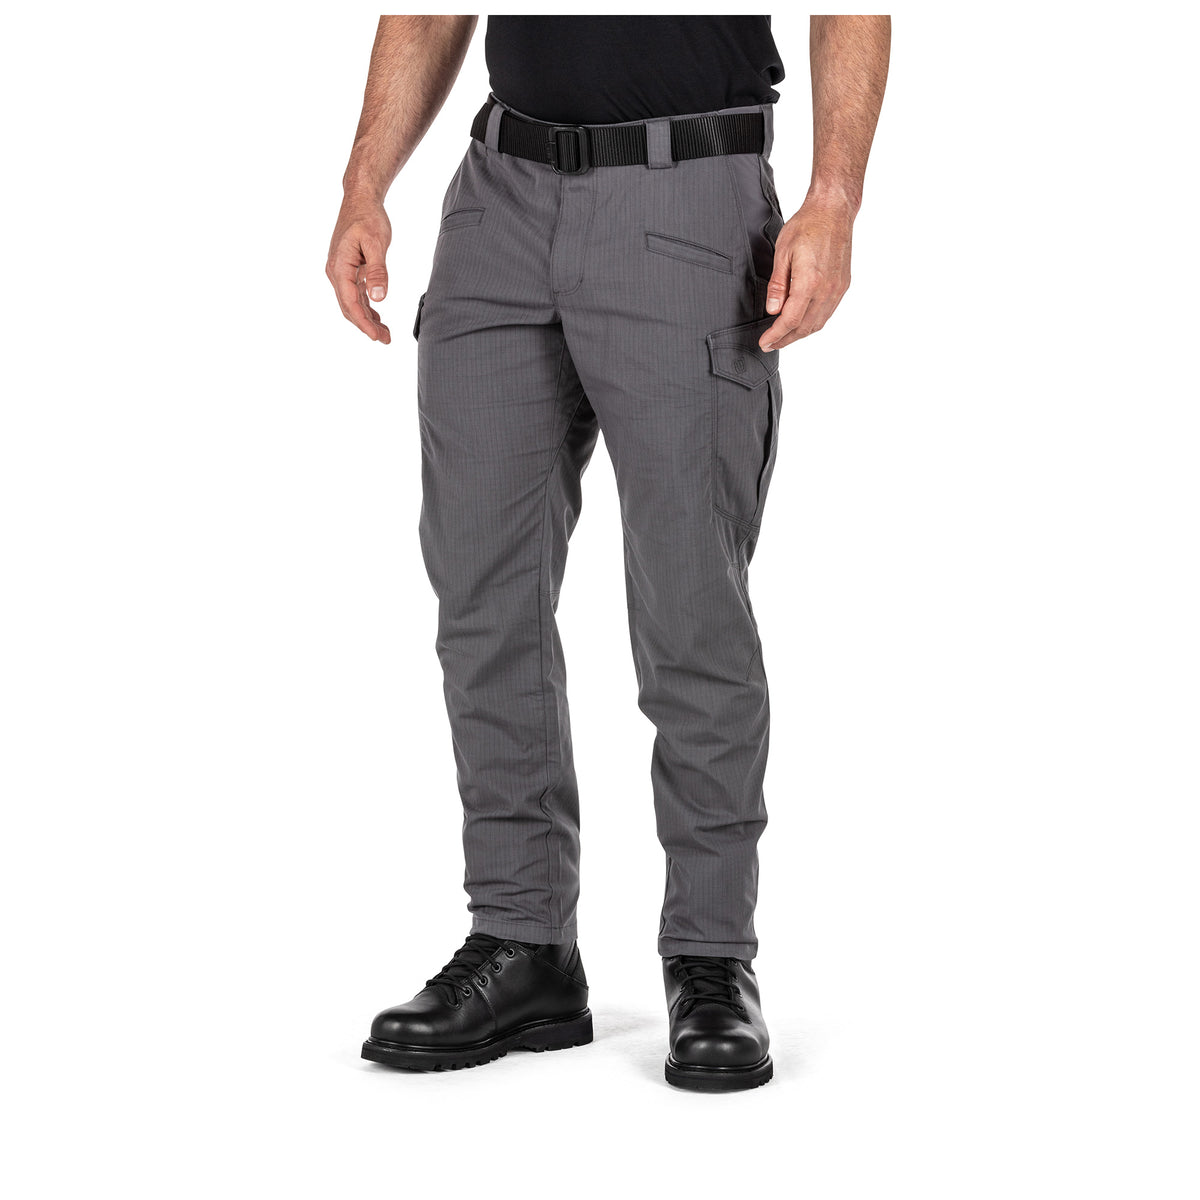 ICON PANT – 5.11 Tactical Japan